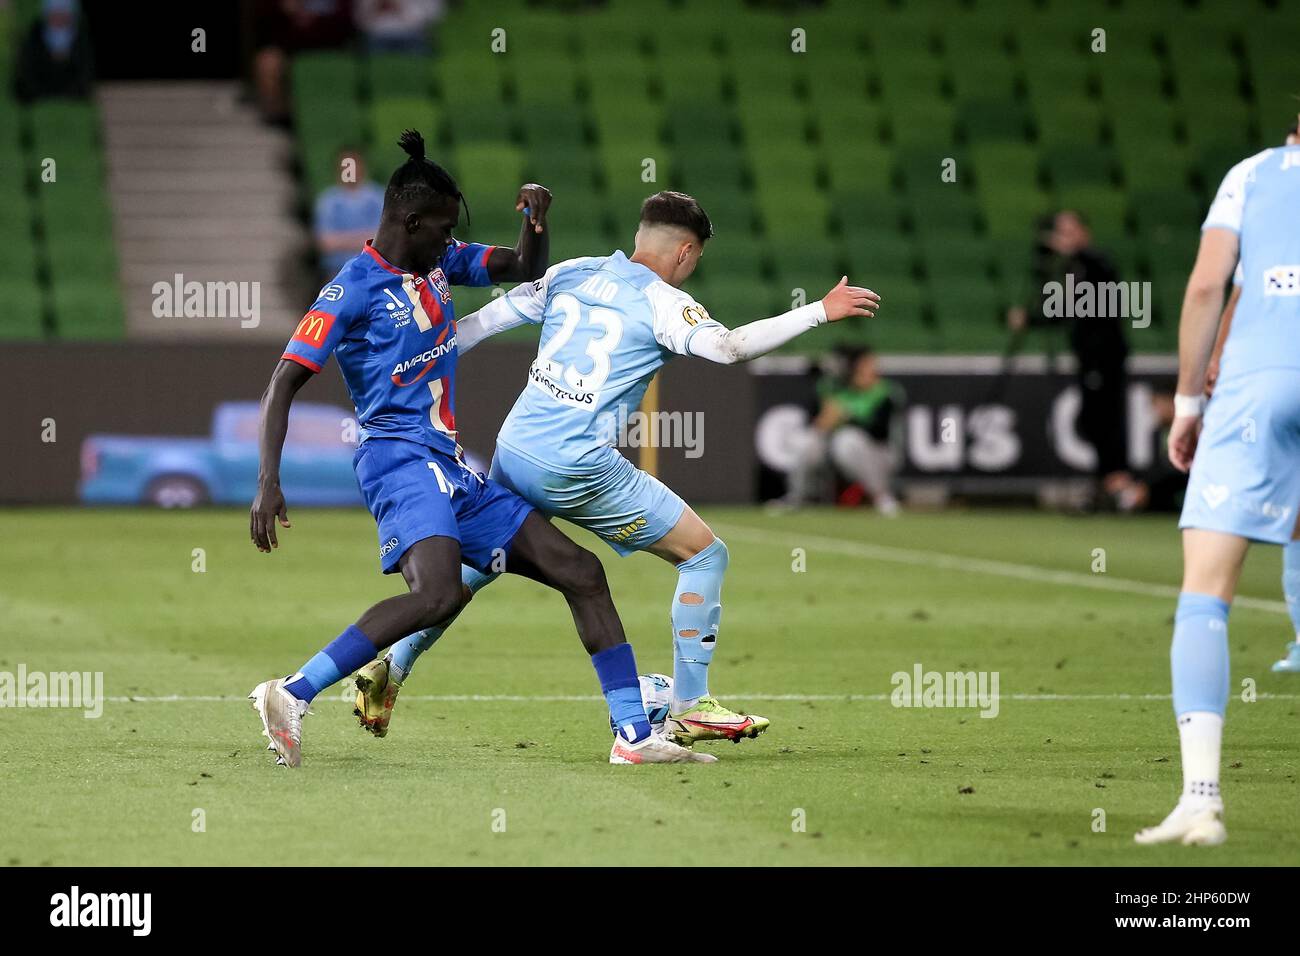 Melbourne, Australia, 18 February, 2022. Valentino Yuel of Newcastle Jets tackles Marco Tilio of Melbourne City FC during the A-League soccer match between Melbourne City FC and Newcastle Jets at AAMI Park on February 18, 2022 in Melbourne, Australia. Credit: Dave Hewison/Speed Media/Alamy Live News Stock Photo